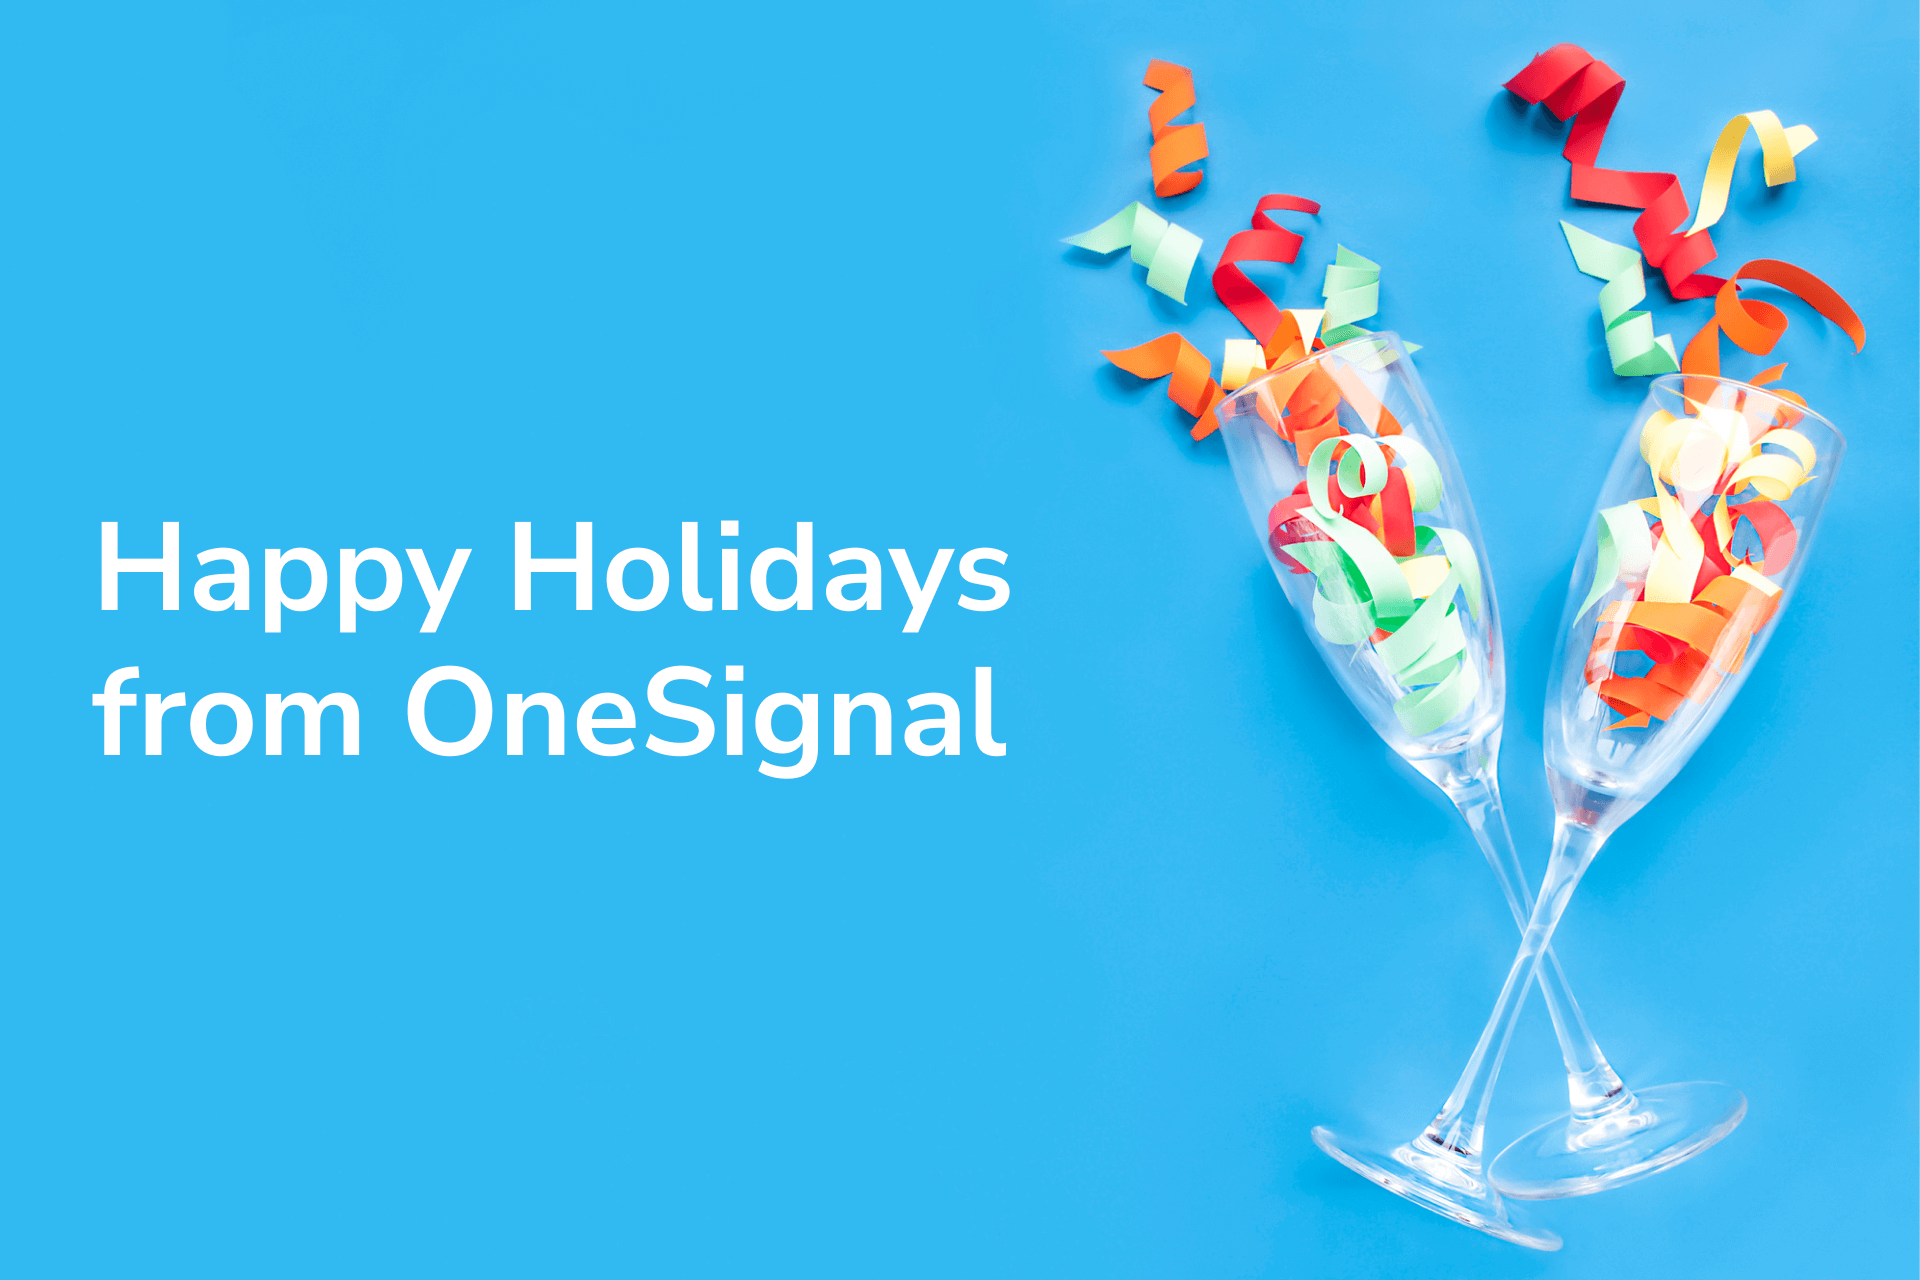 Happy Holidays and Thank You to our OneSignal Community